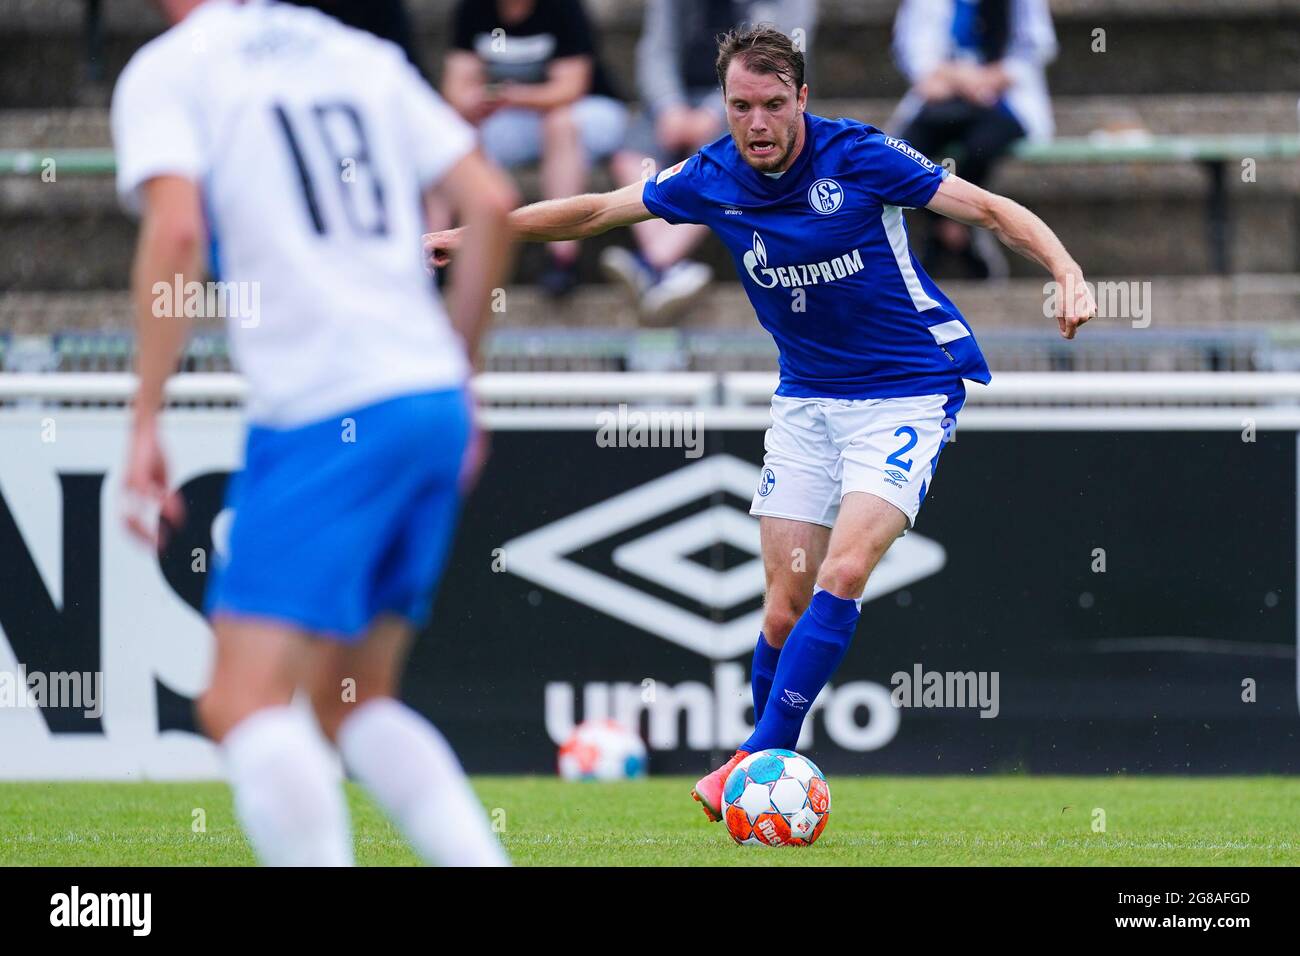 GELSENKIRCHEN, GERMANY - JULY 16: Thomas Ouwejan of Schalke 04 during the Club Friendly match between FC Schalke 04 and Vitesse at Parkstadion on July 16, 2021 in Gelsenkirchen, Germany (Photo by Joris Verwijst/Orange Pictures) Stock Photo